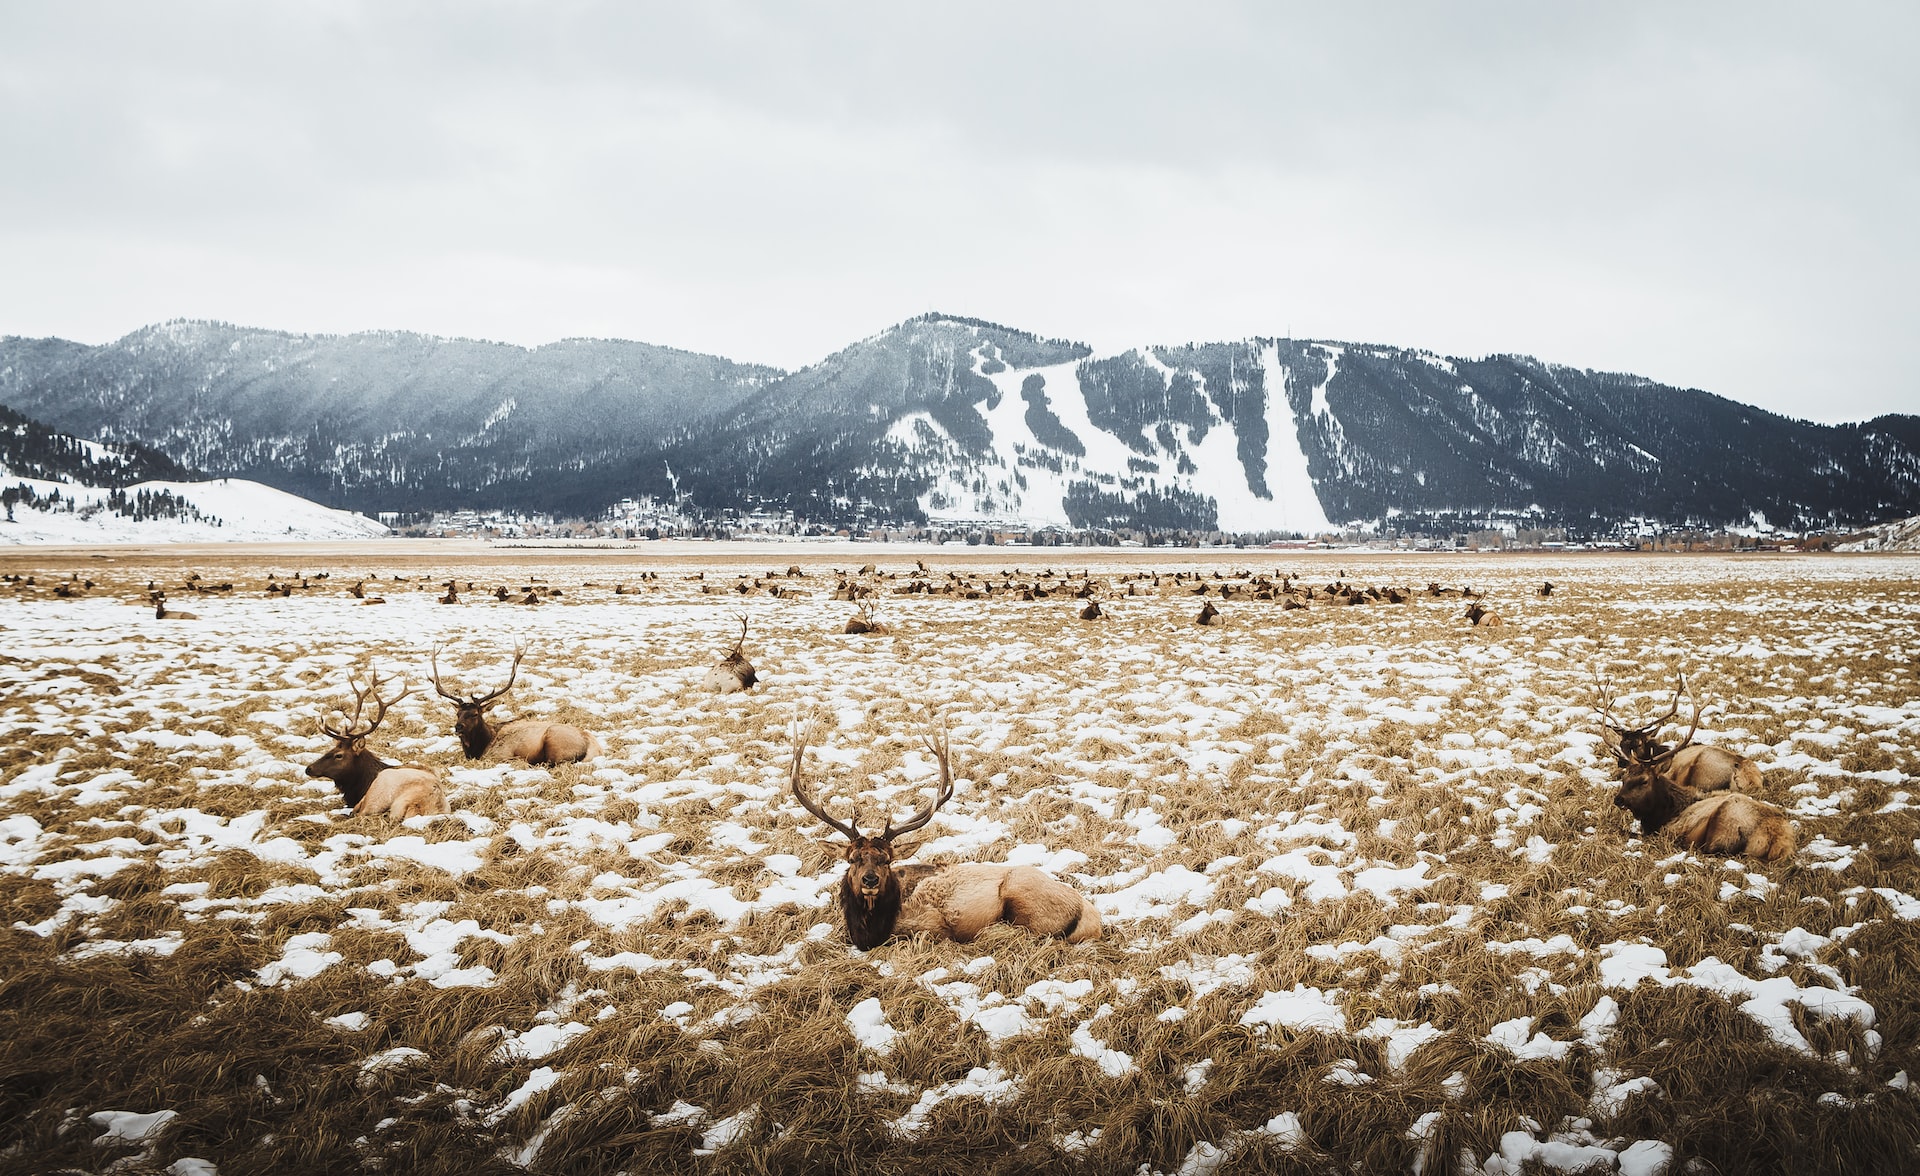 Large horned elk sitting around on a snowy plain in Wyoming.